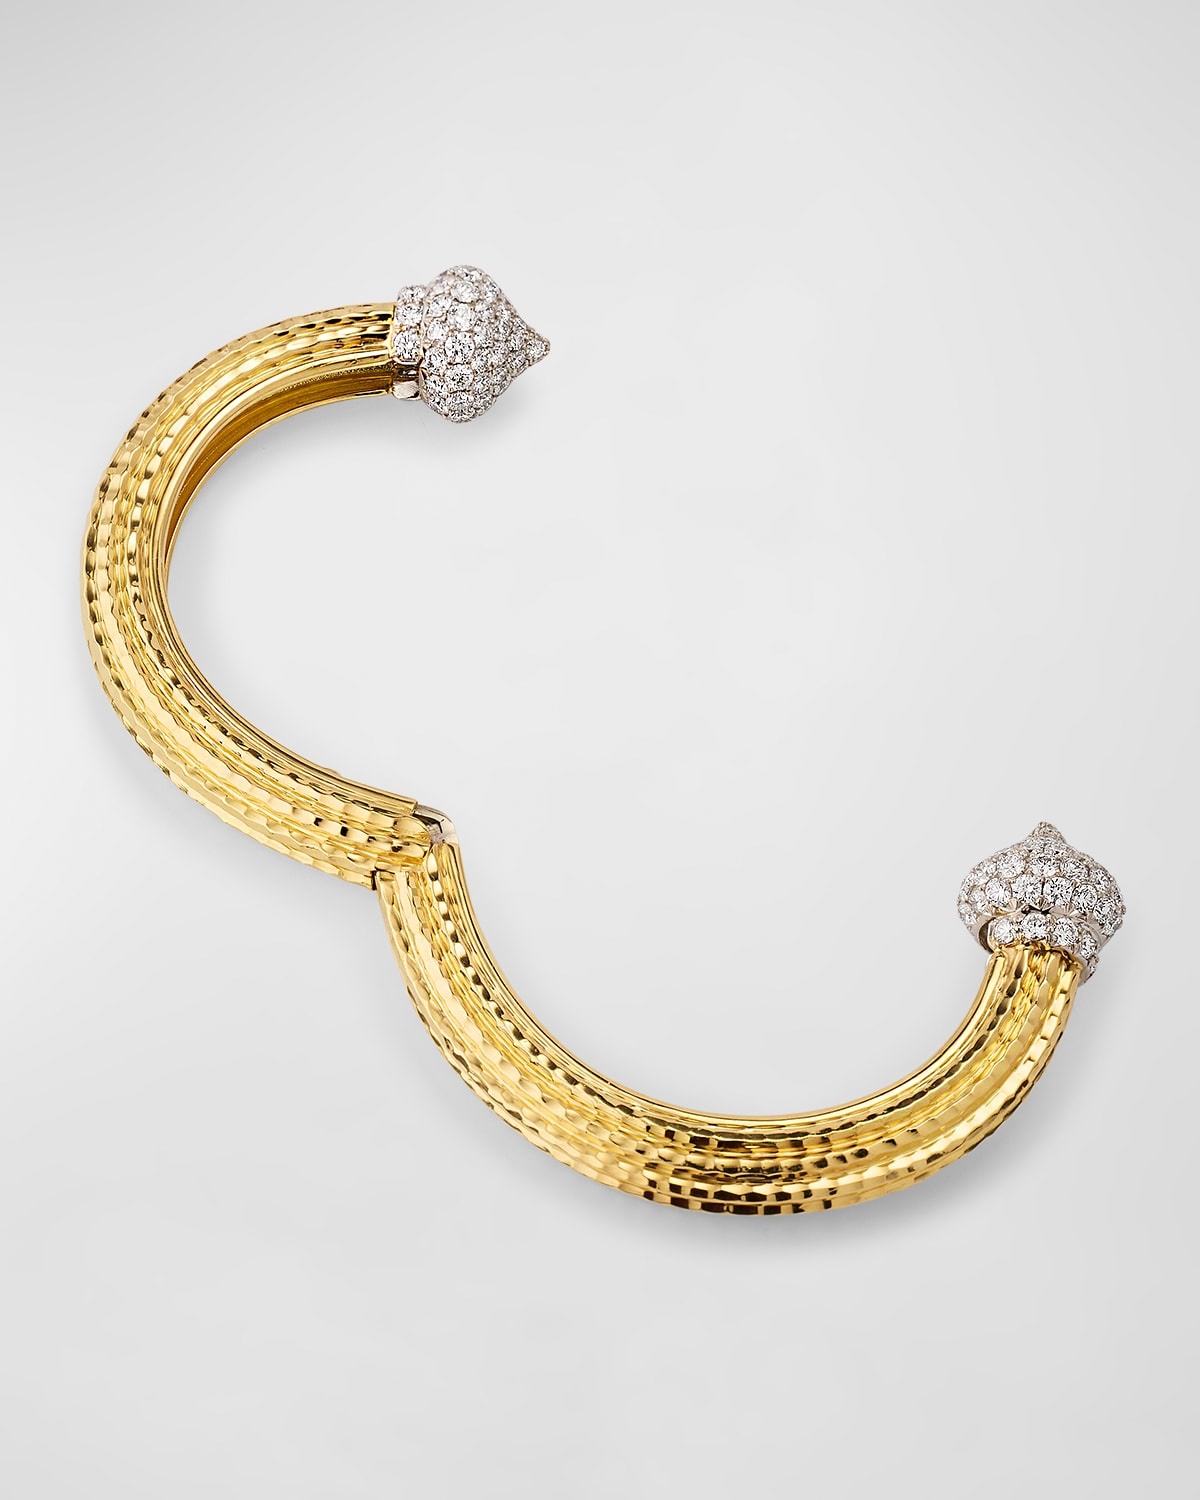 18K Yellow  Gold Hammered Bracelet with Diamond Caps - 4